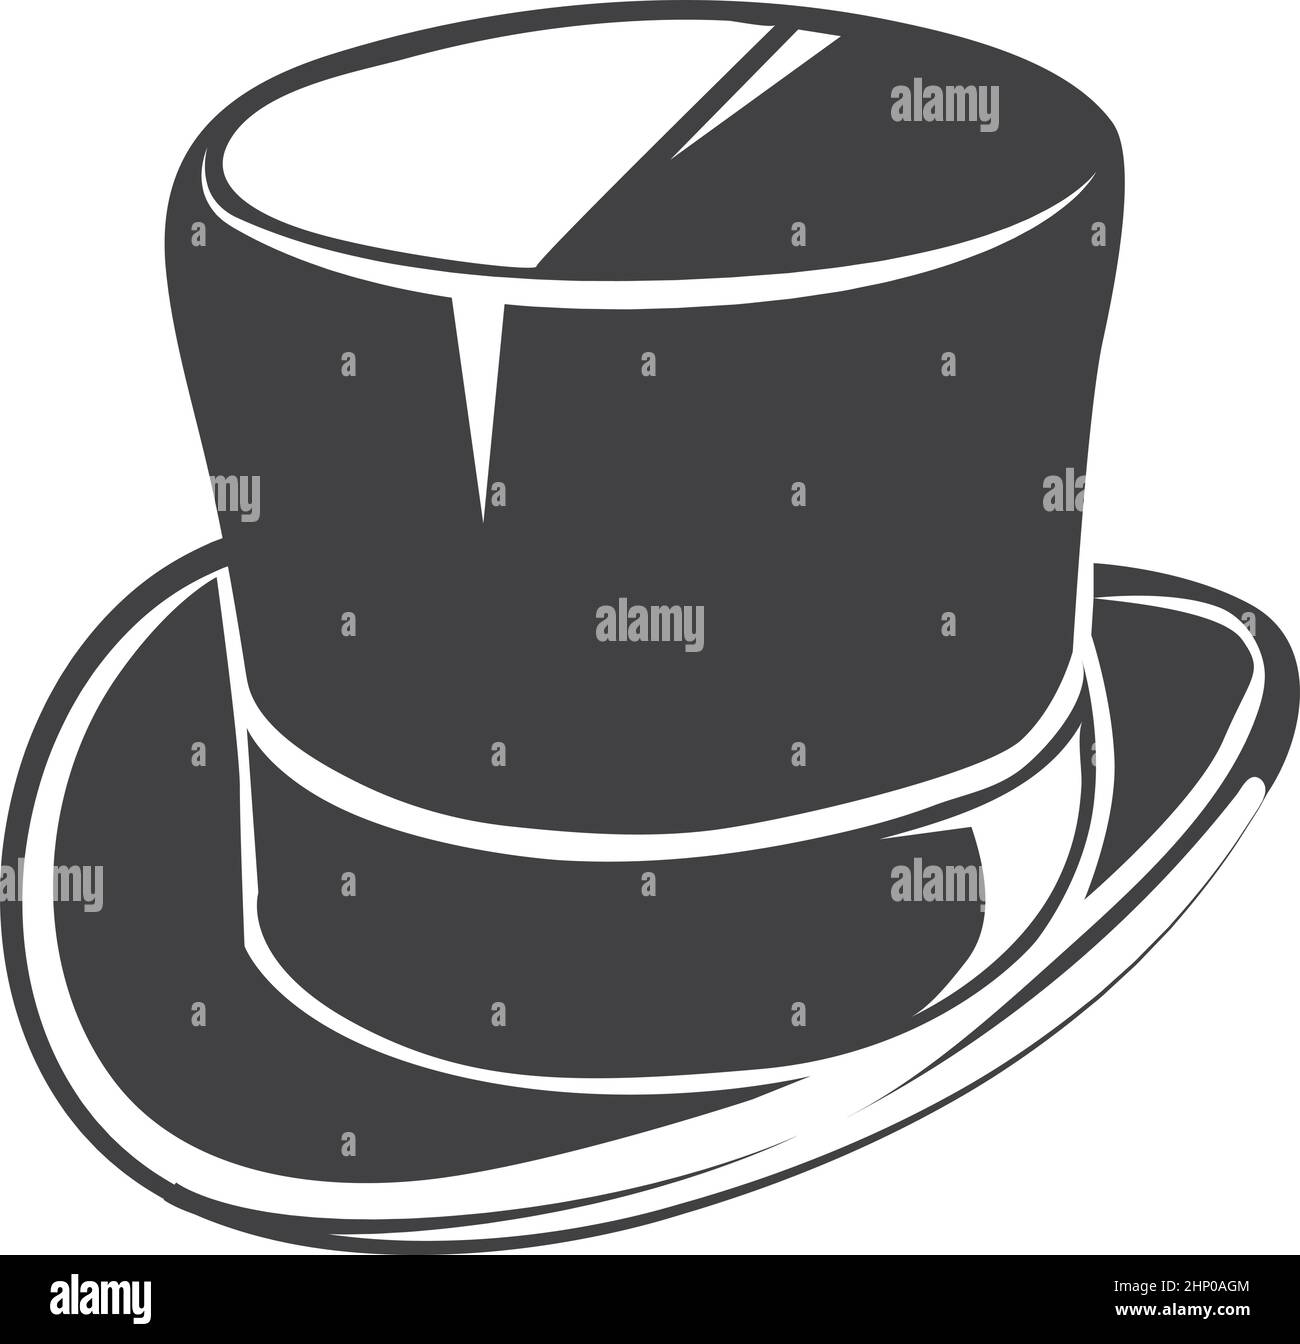 Cylinder gentleman Black and White Stock Photos & Images - Alamy